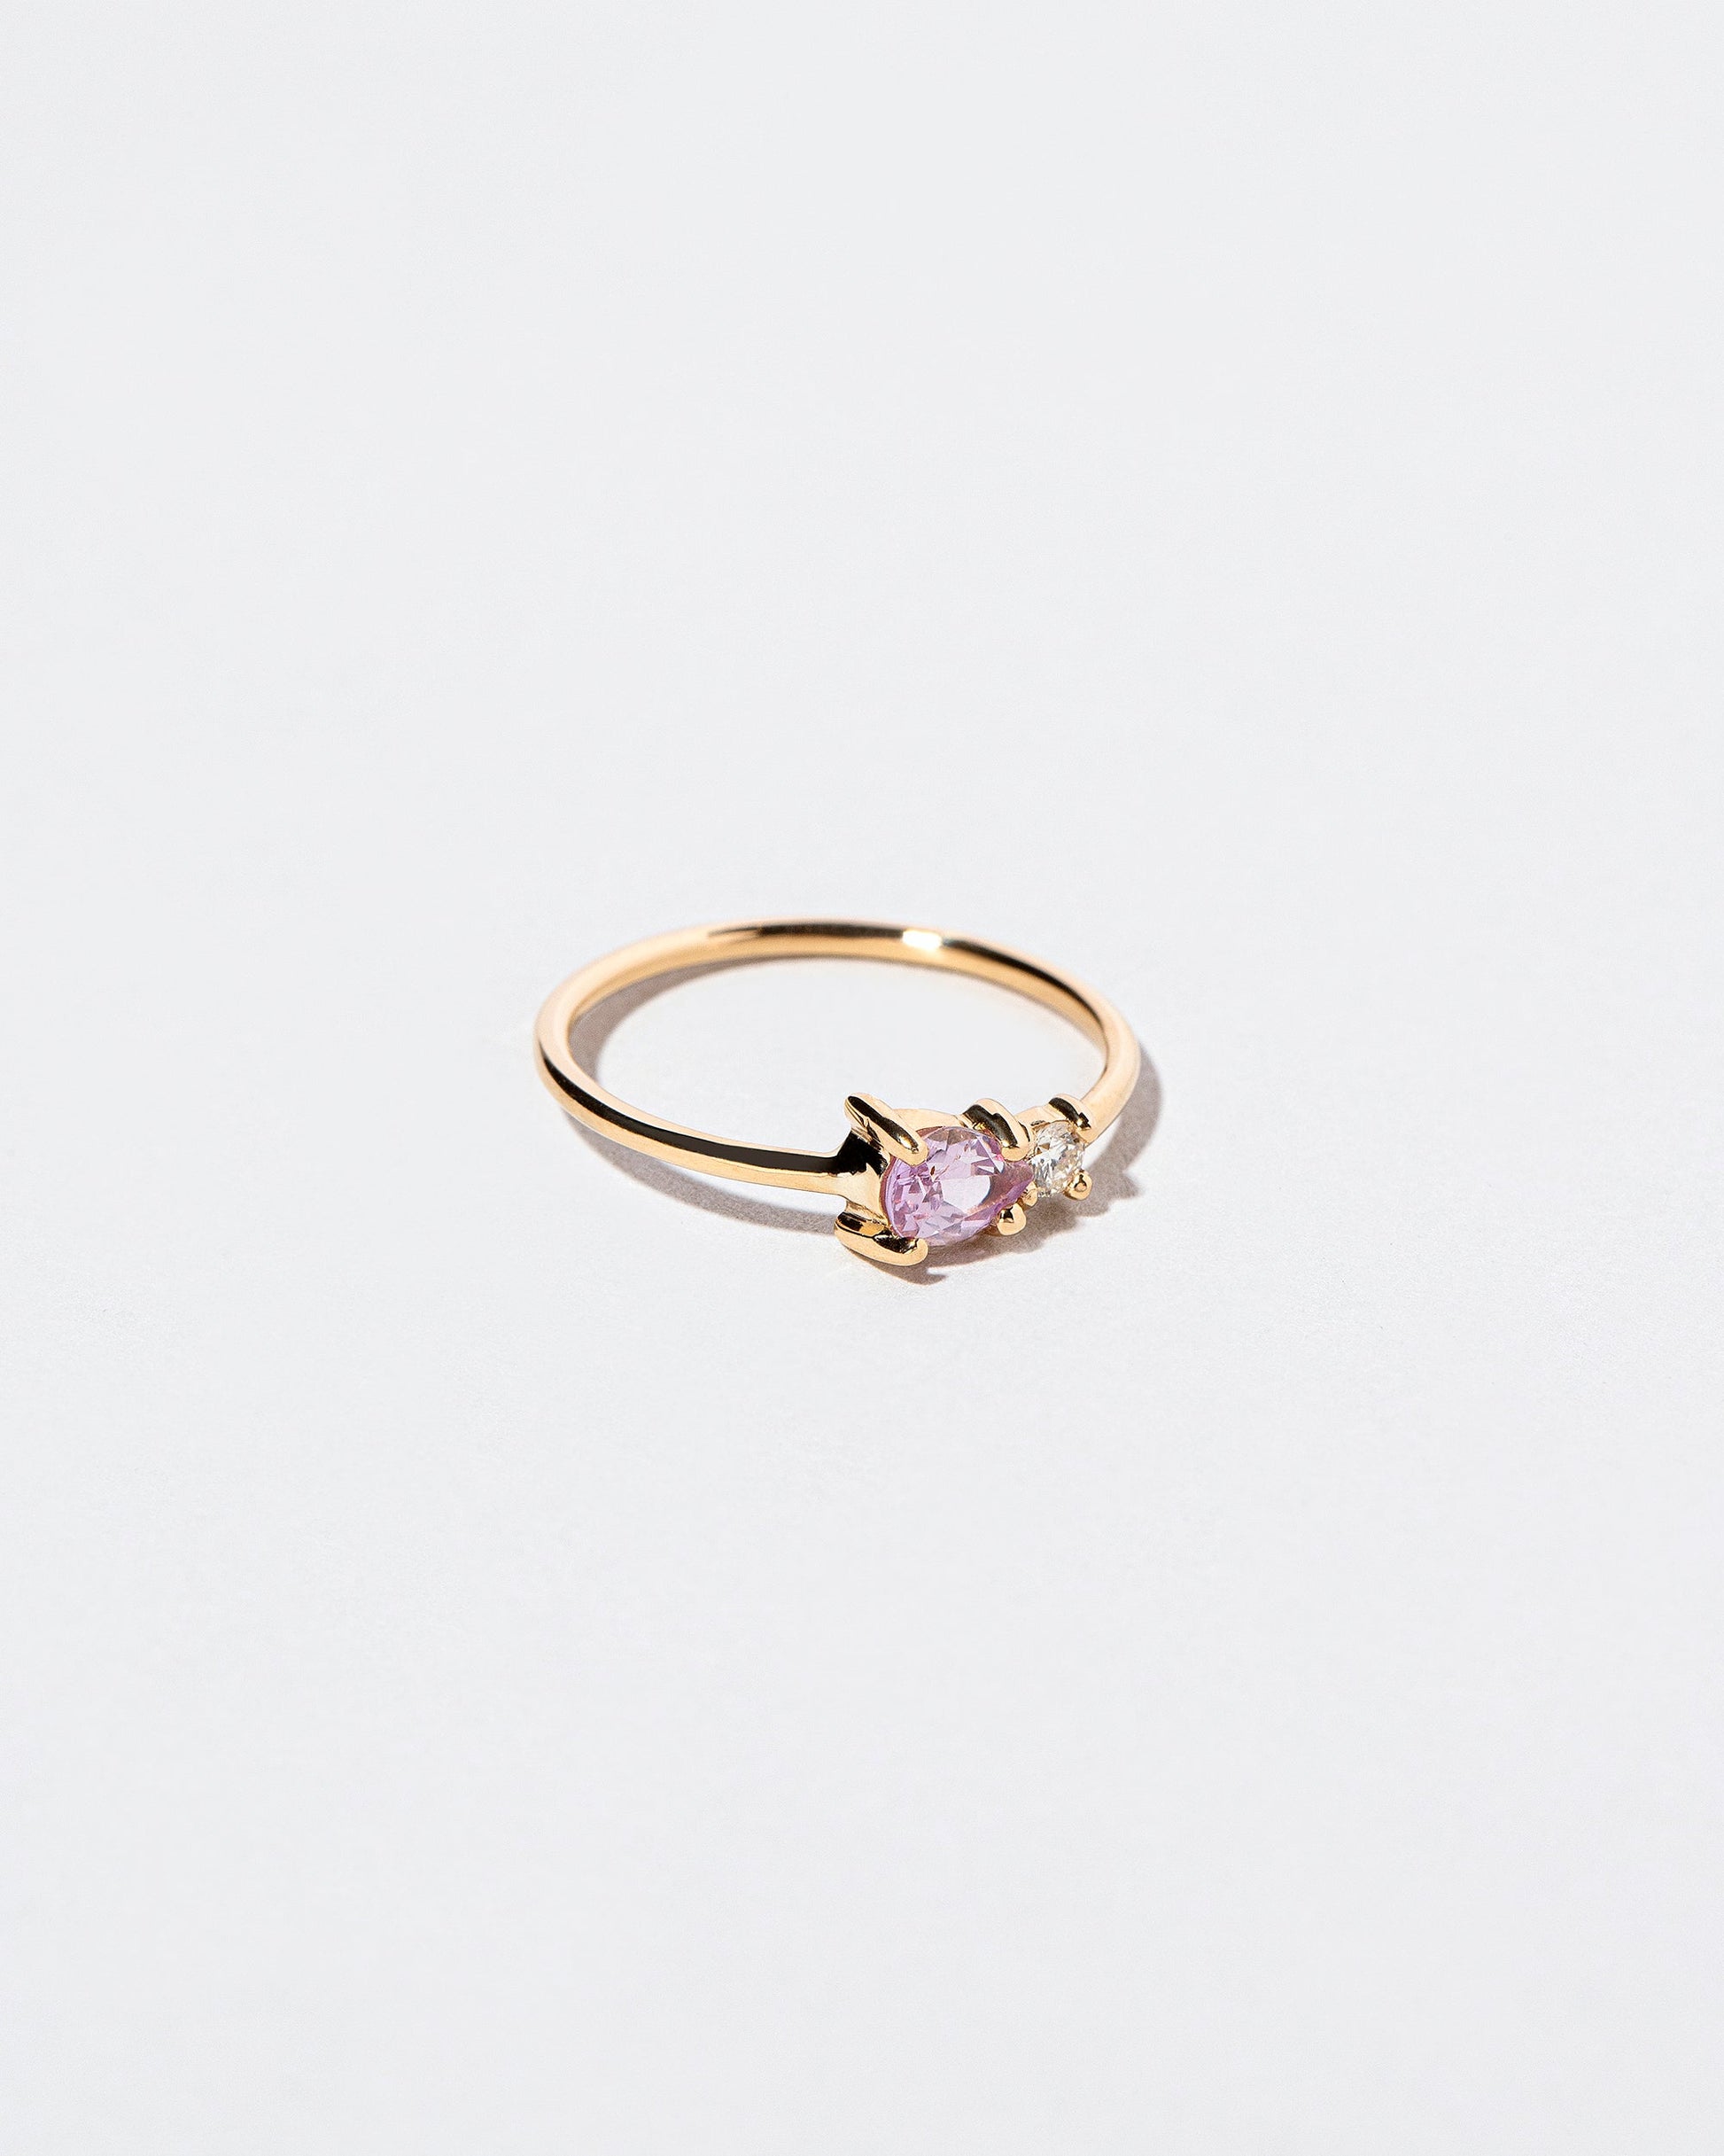  Teardrop Ring - Pink Sapphire on light color background.